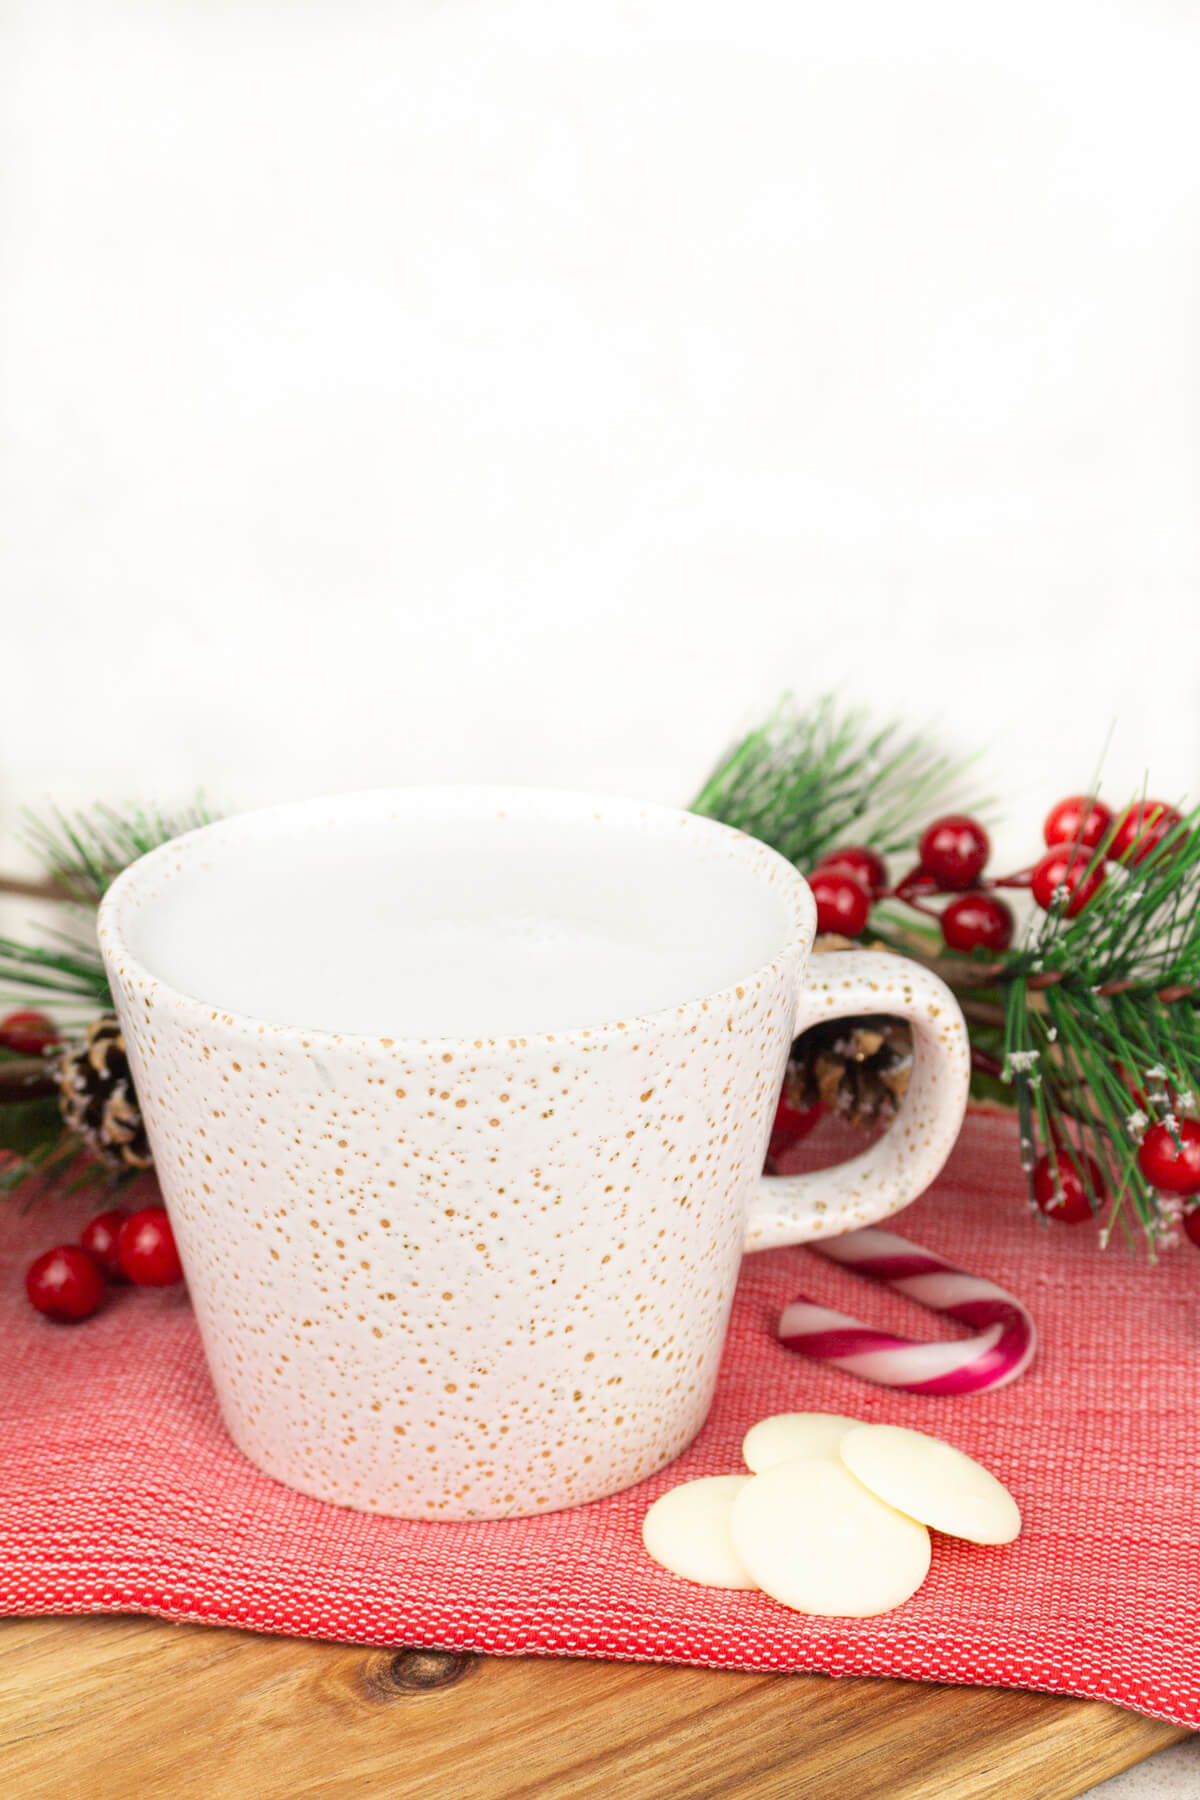 https://mindfulmocktail.com/wp-content/uploads/2020/12/peppermint-white-hot-chocolate-1.jpg